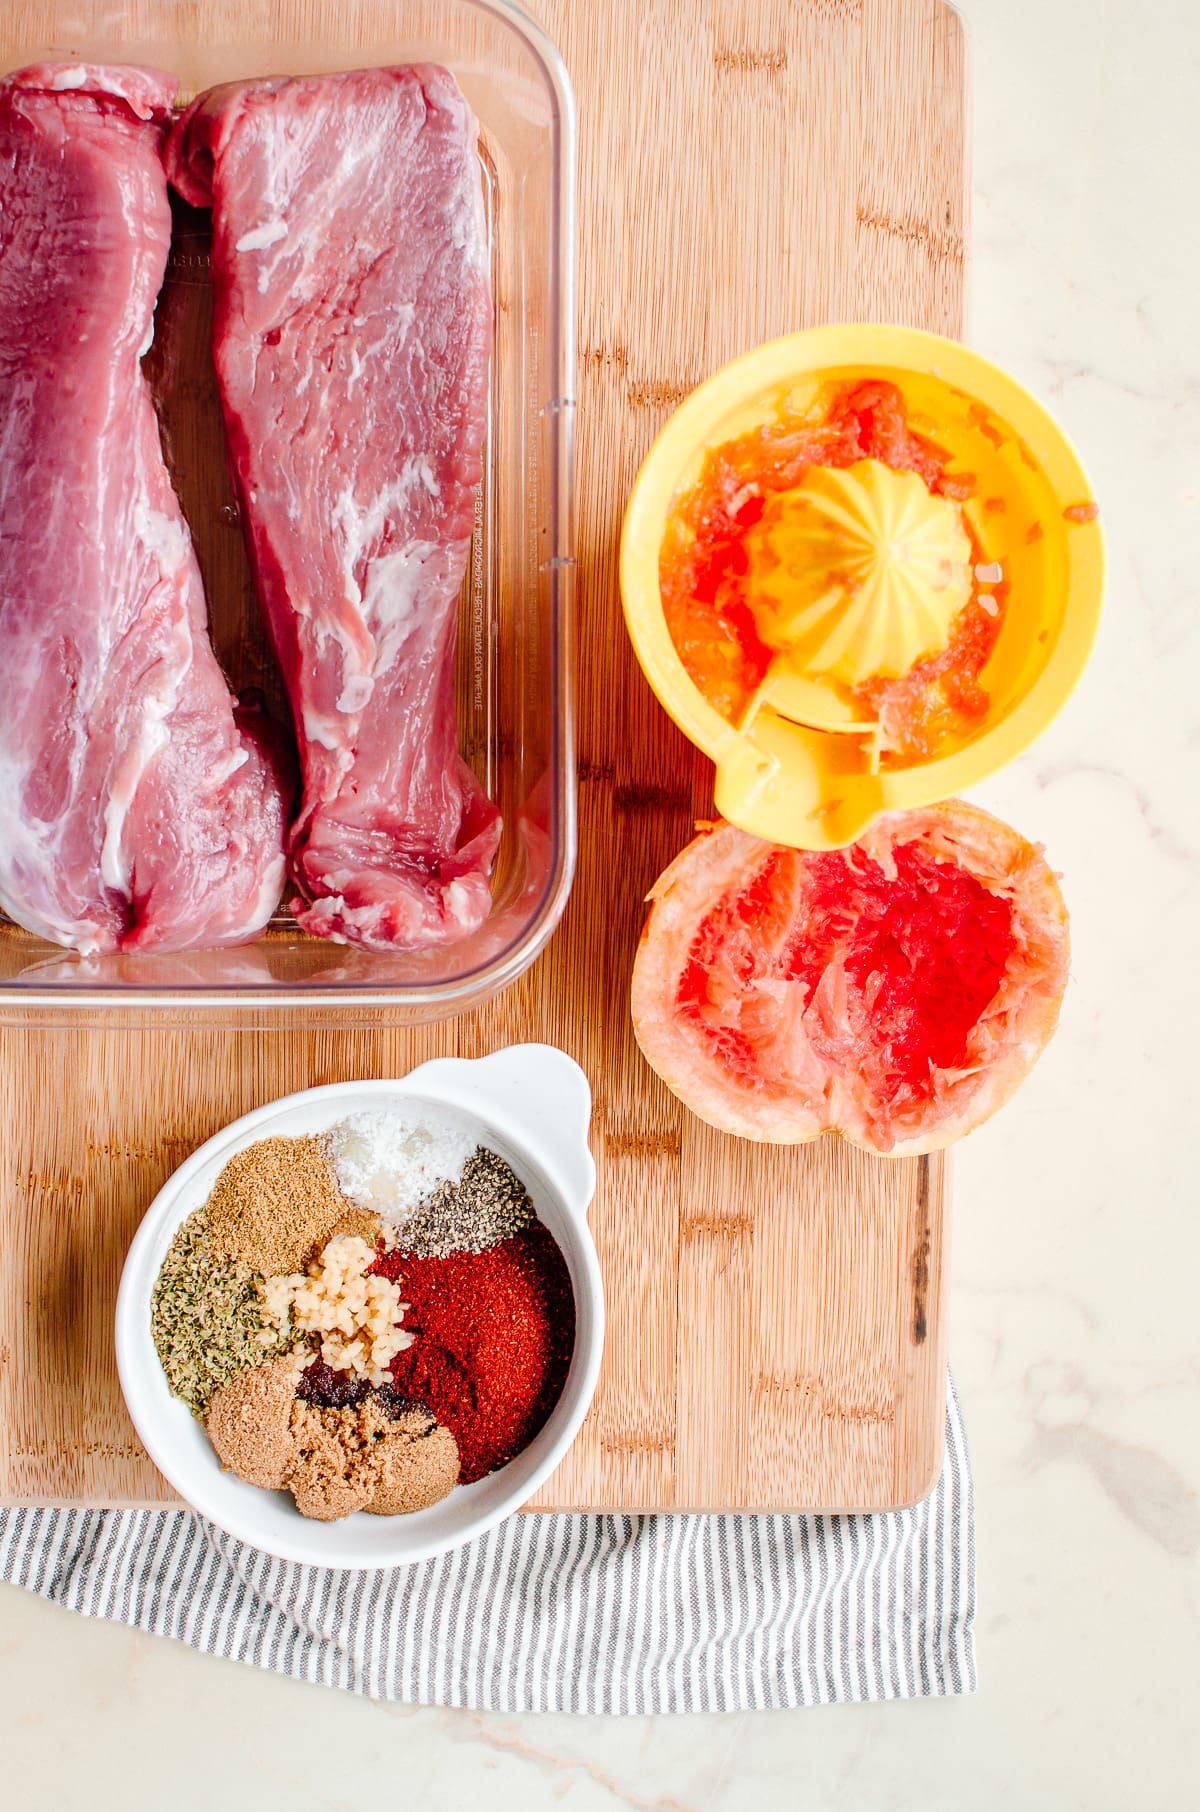 Two pork tenderloins in a clear dish with a bowl of spices for a rub and a juicer with grapefruit on the side.